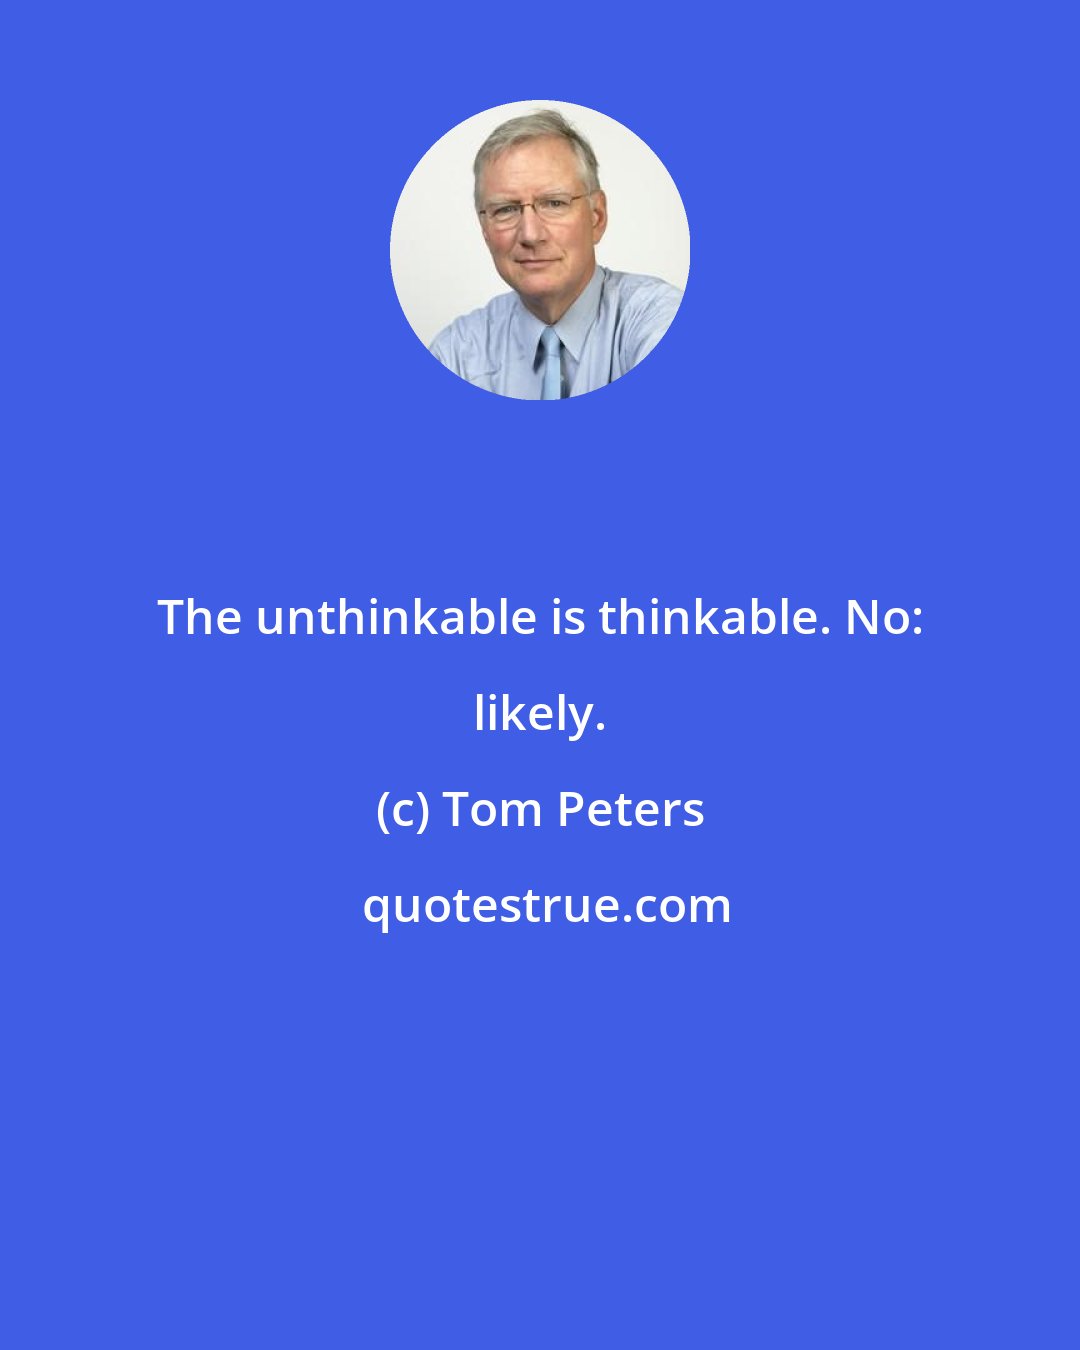 Tom Peters: The unthinkable is thinkable. No: likely.